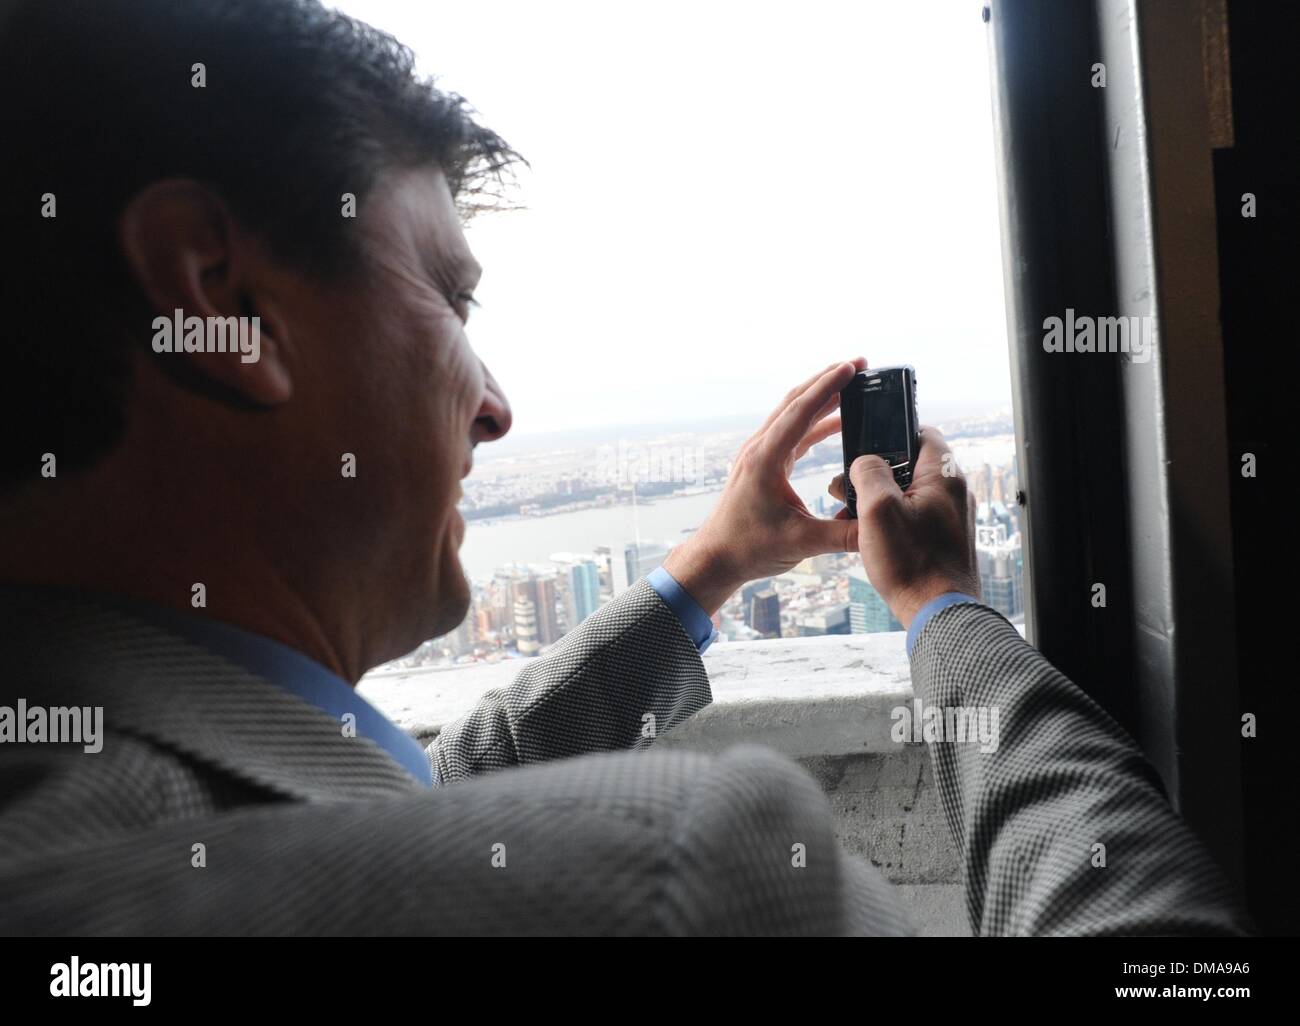 Nov 04, 2009 - Manhattan, New York, USA - TINO MARTINEZ taking a cell phone picture of Yankee Stadium from the 103rd floor parapet. New York Yankee great and four-time World Series champion Tino Martinez lights and tours the Empire State Building to wish the Bronx Bombers good and celebrate the playing of Game 6 against the Philadelphia Phillies at Yankee Stadium tonight.  (Credit  Stock Photo